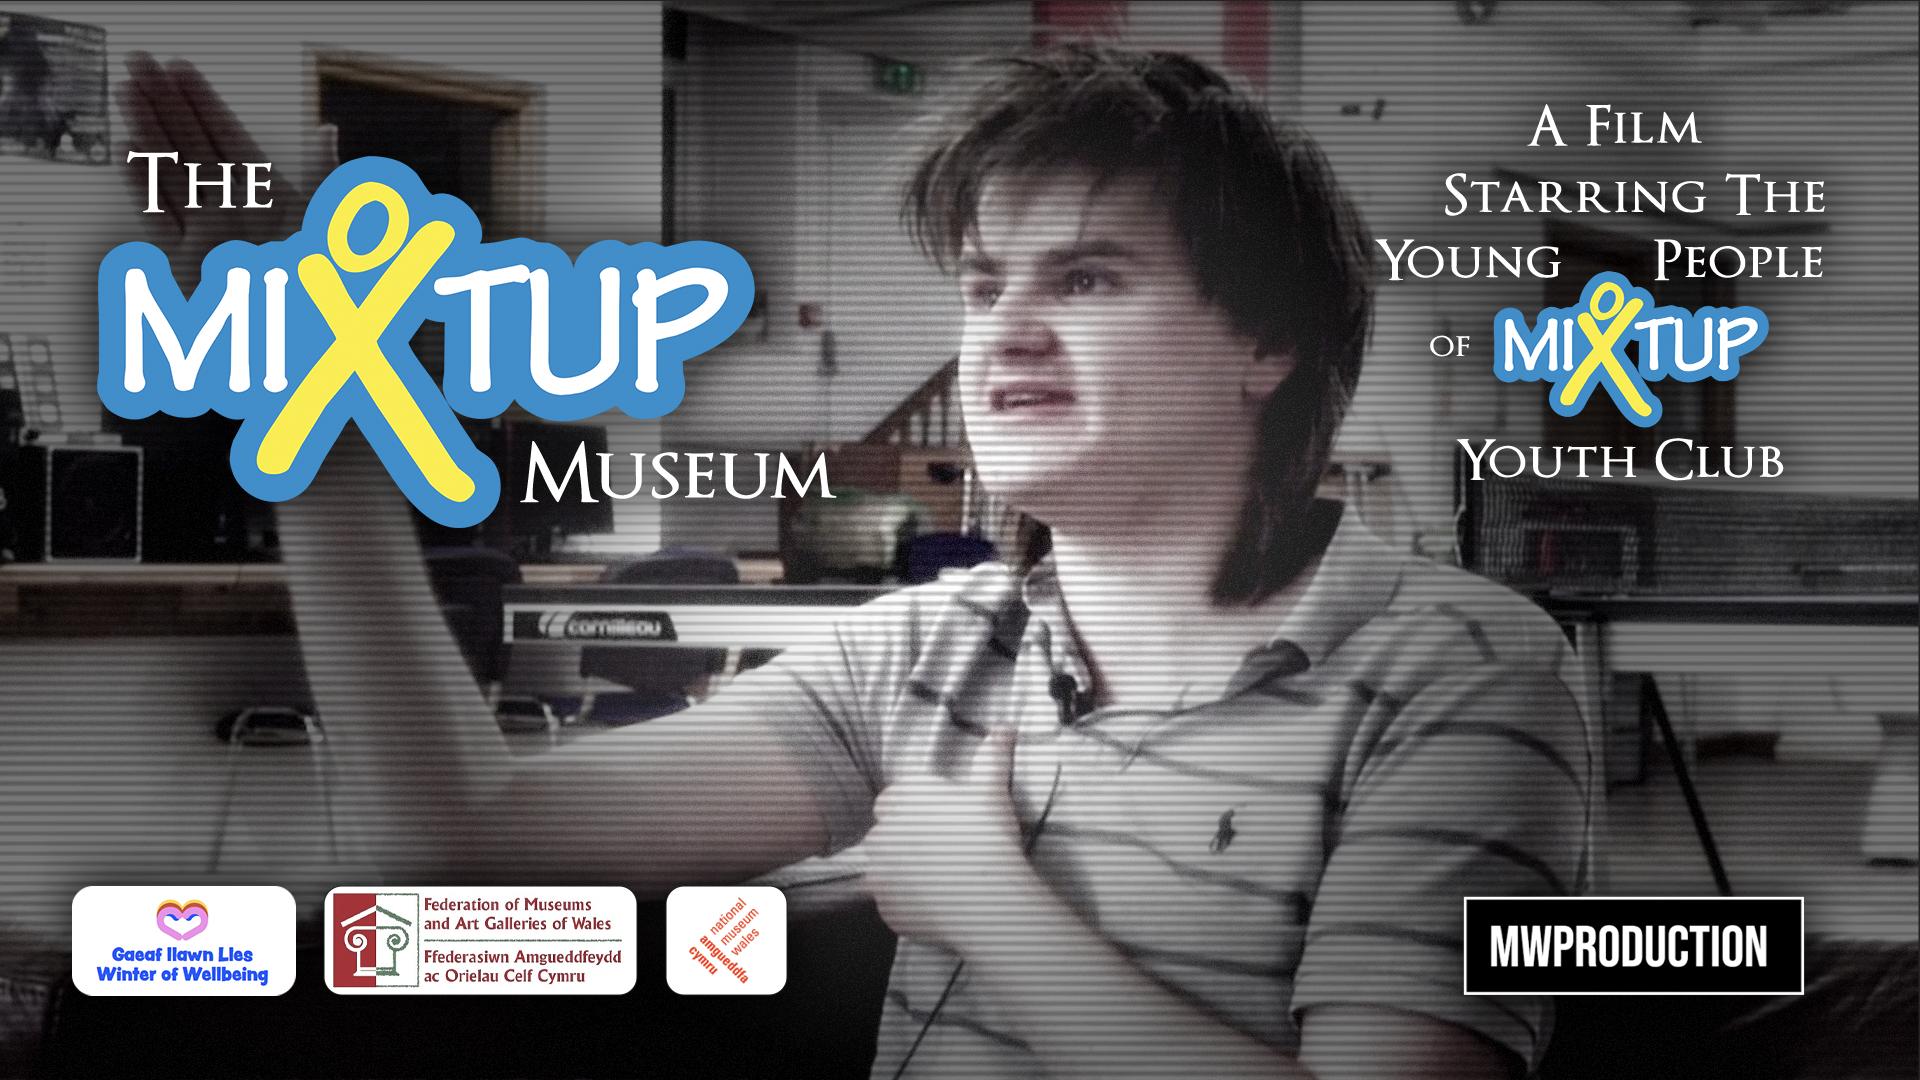 The Mixtup Museum